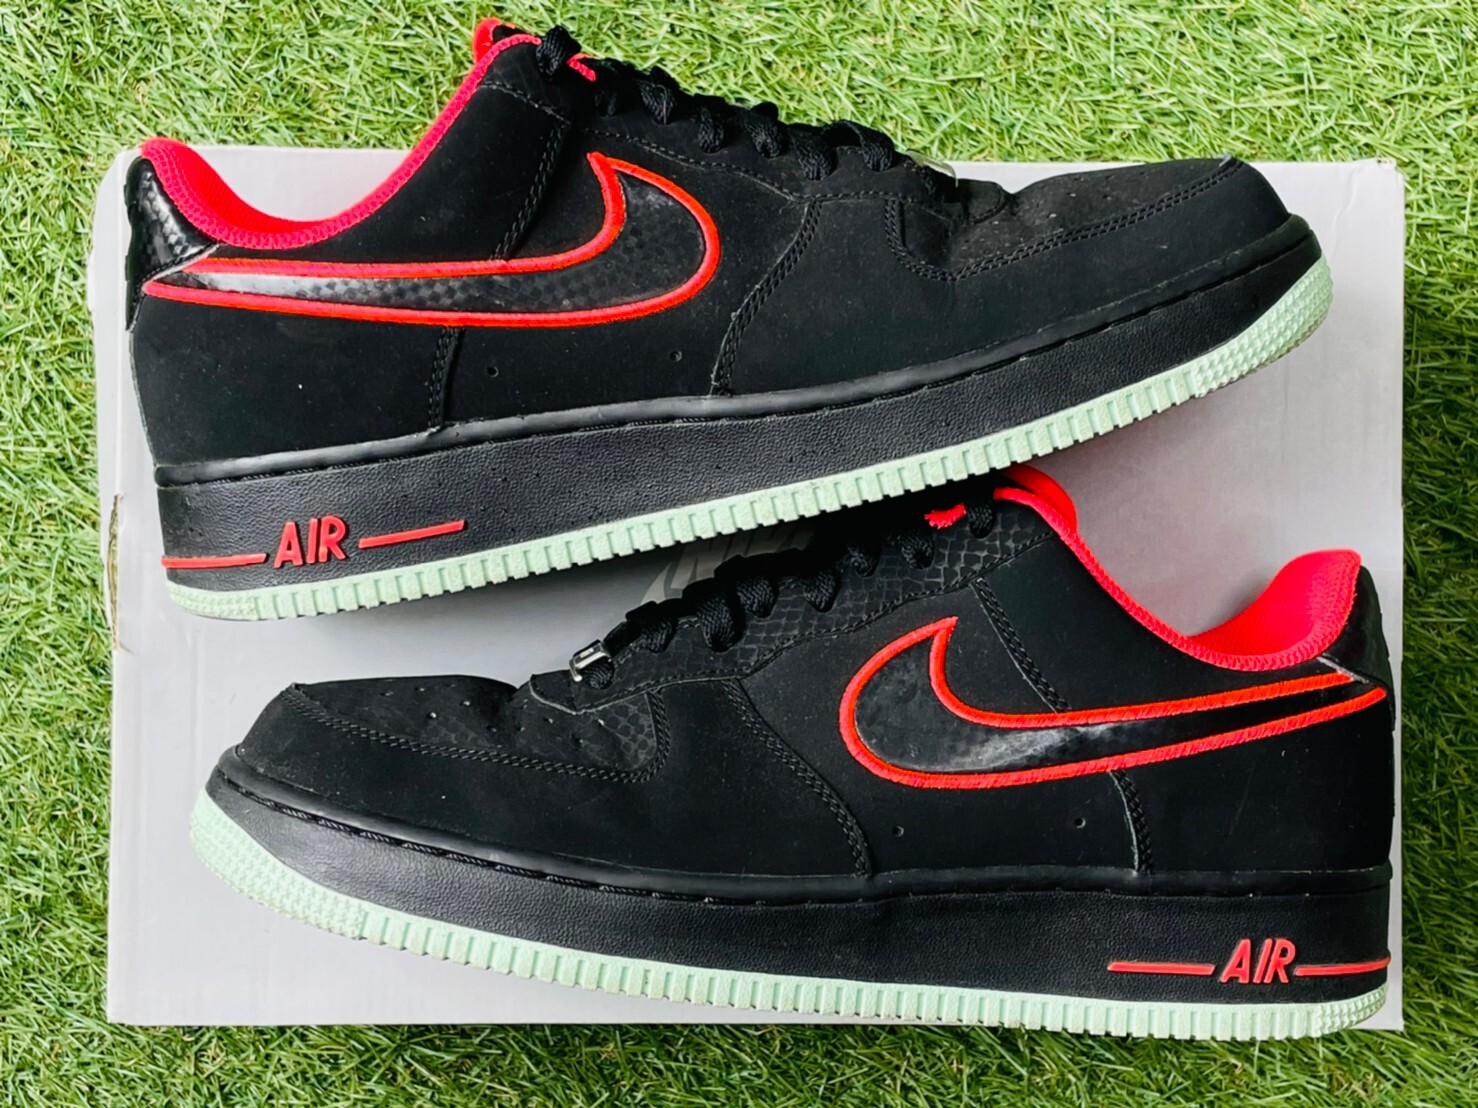 air force 1 low yeezy